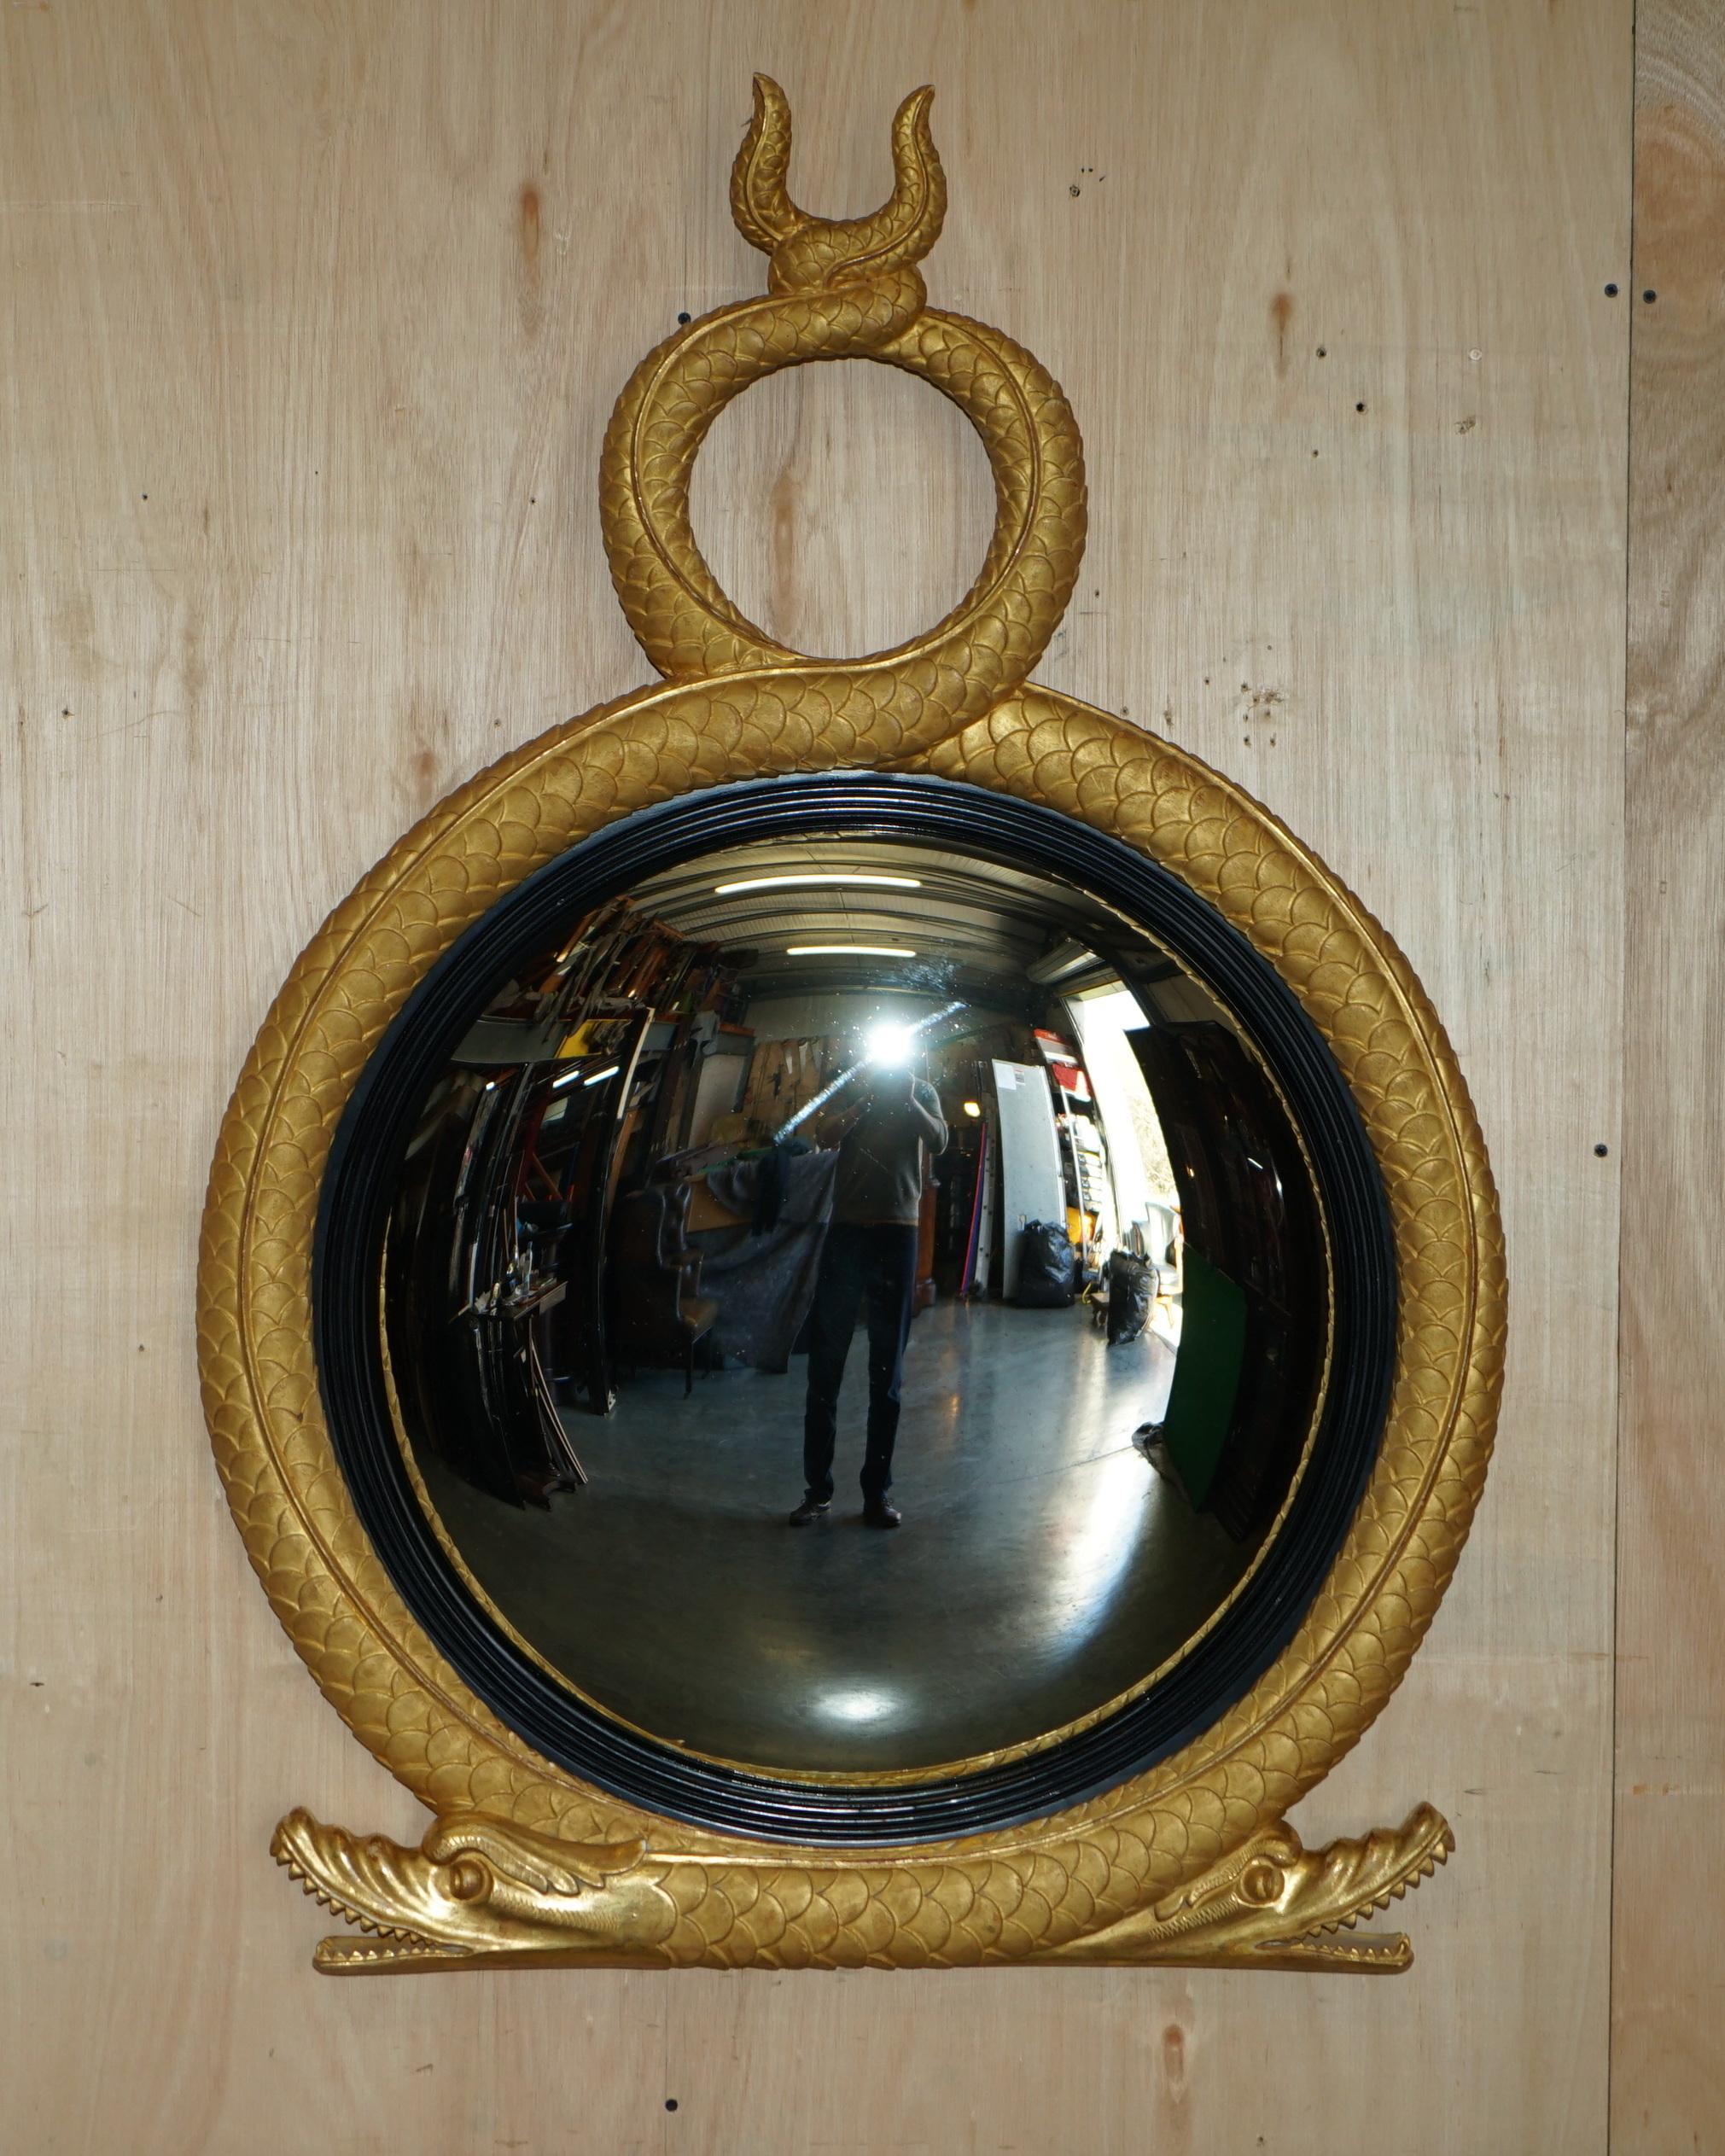 PAIR OF EXTRA LARGE STUNNING REGENCY  Style GOLD GILT TWIN SERPENT CONVEX MiRRORS im Angebot 9